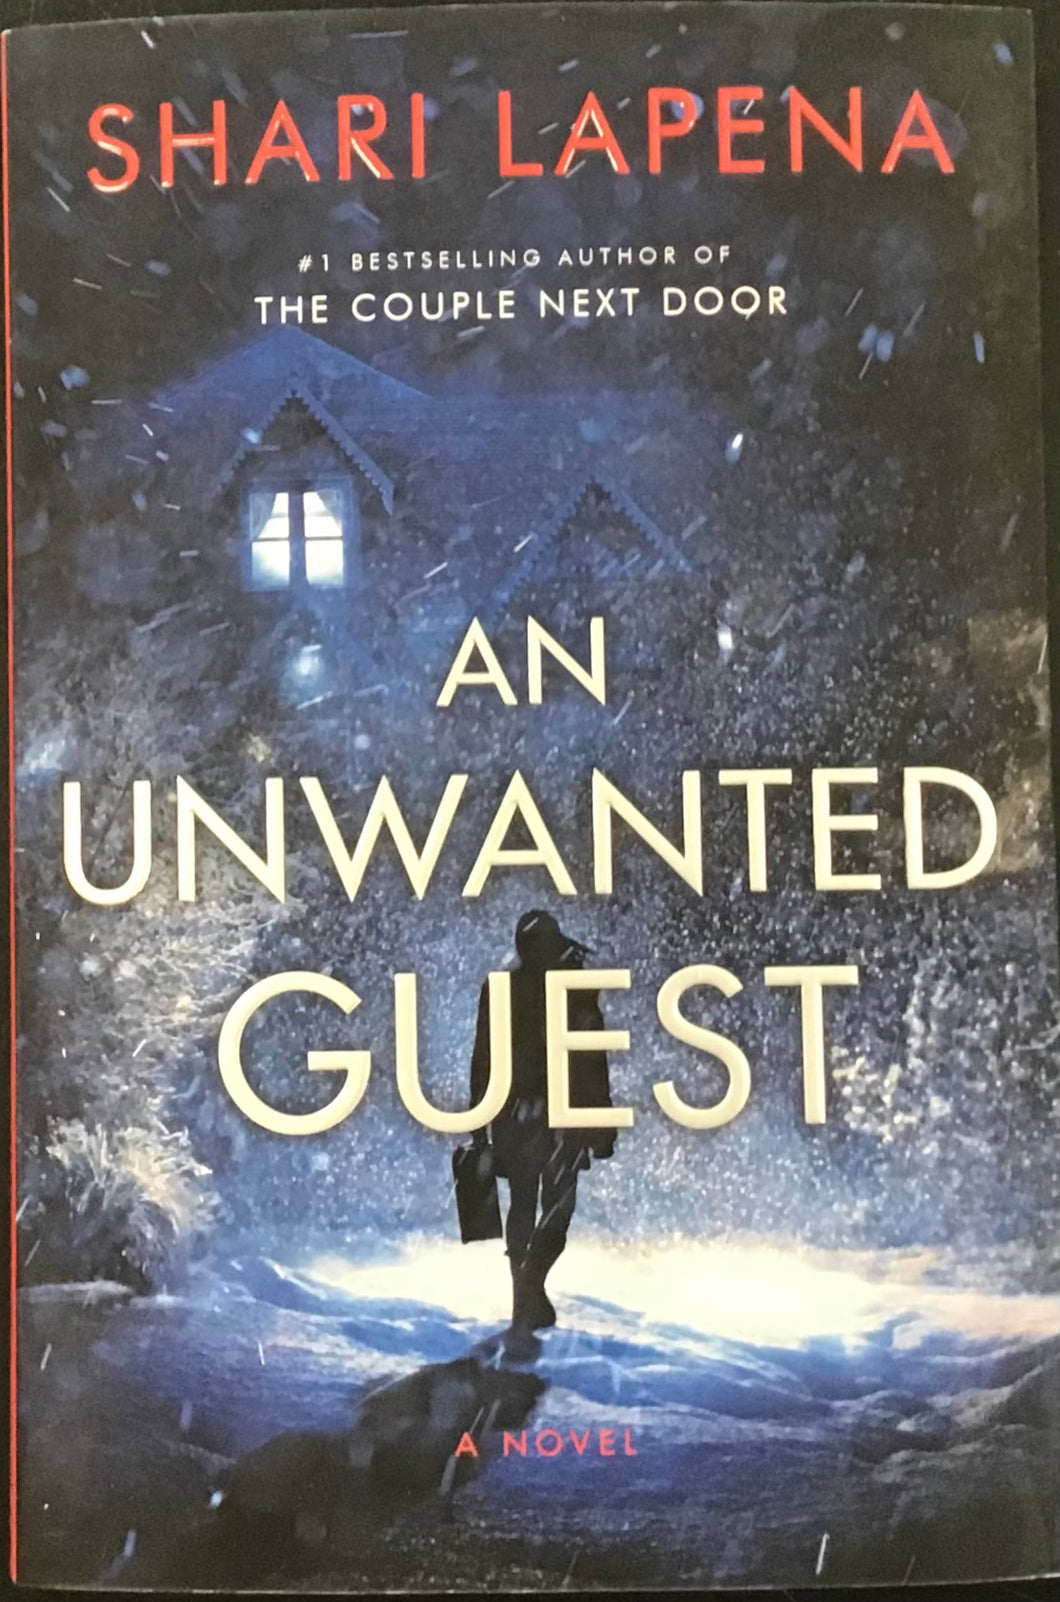 An Unwanted Guest, Shari Lapena